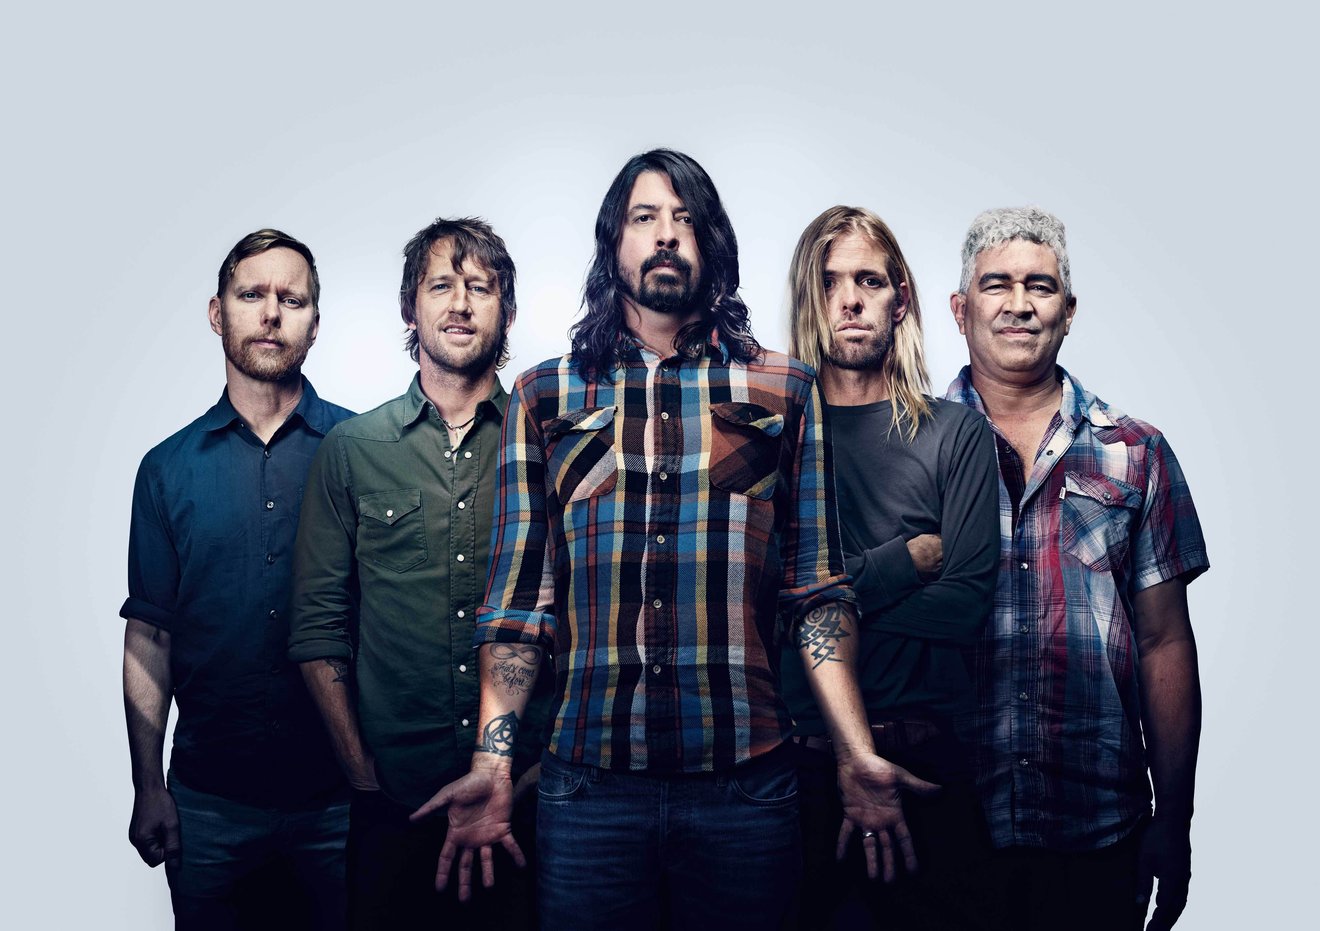 Dave Grohl explains why Foo Fighters were forced to postpone two shows